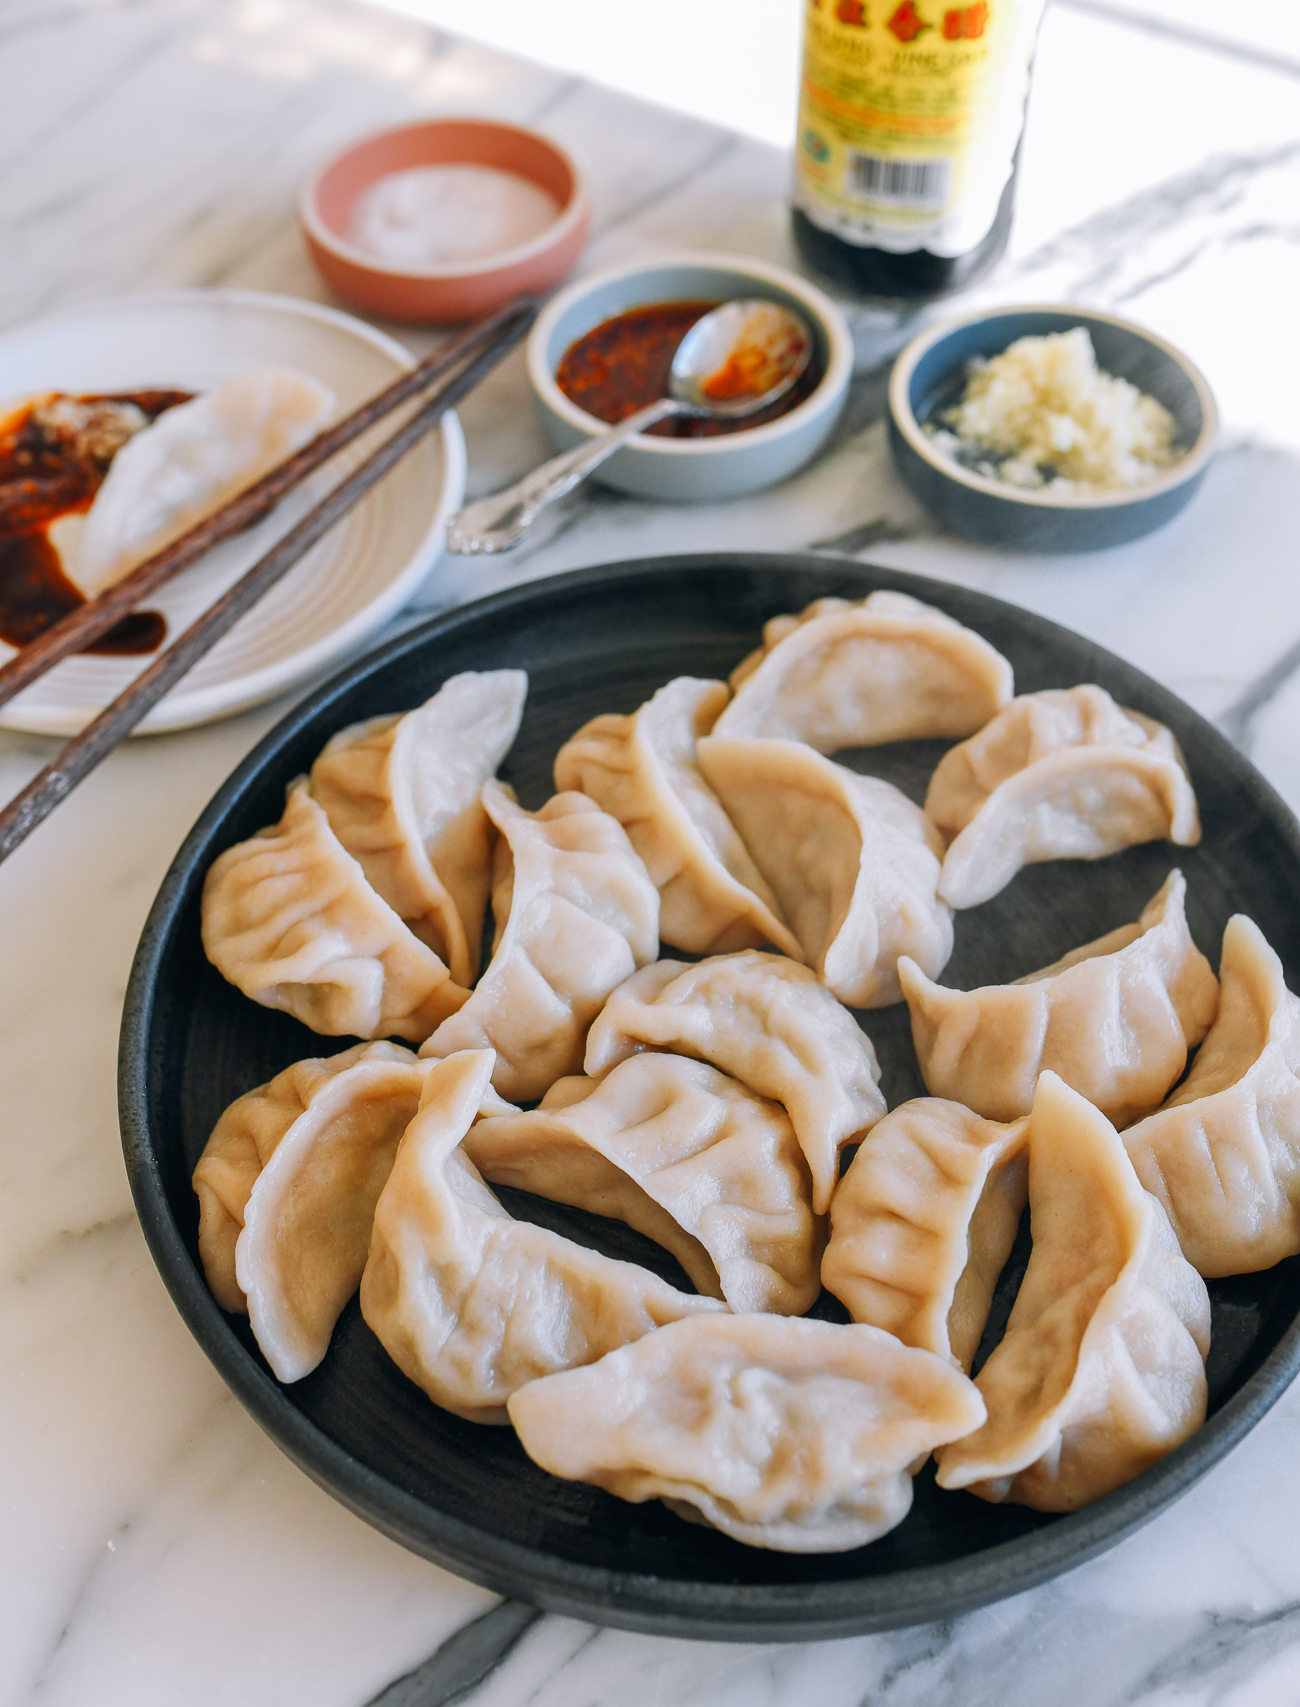 Plate of boiled dumplings with condiments